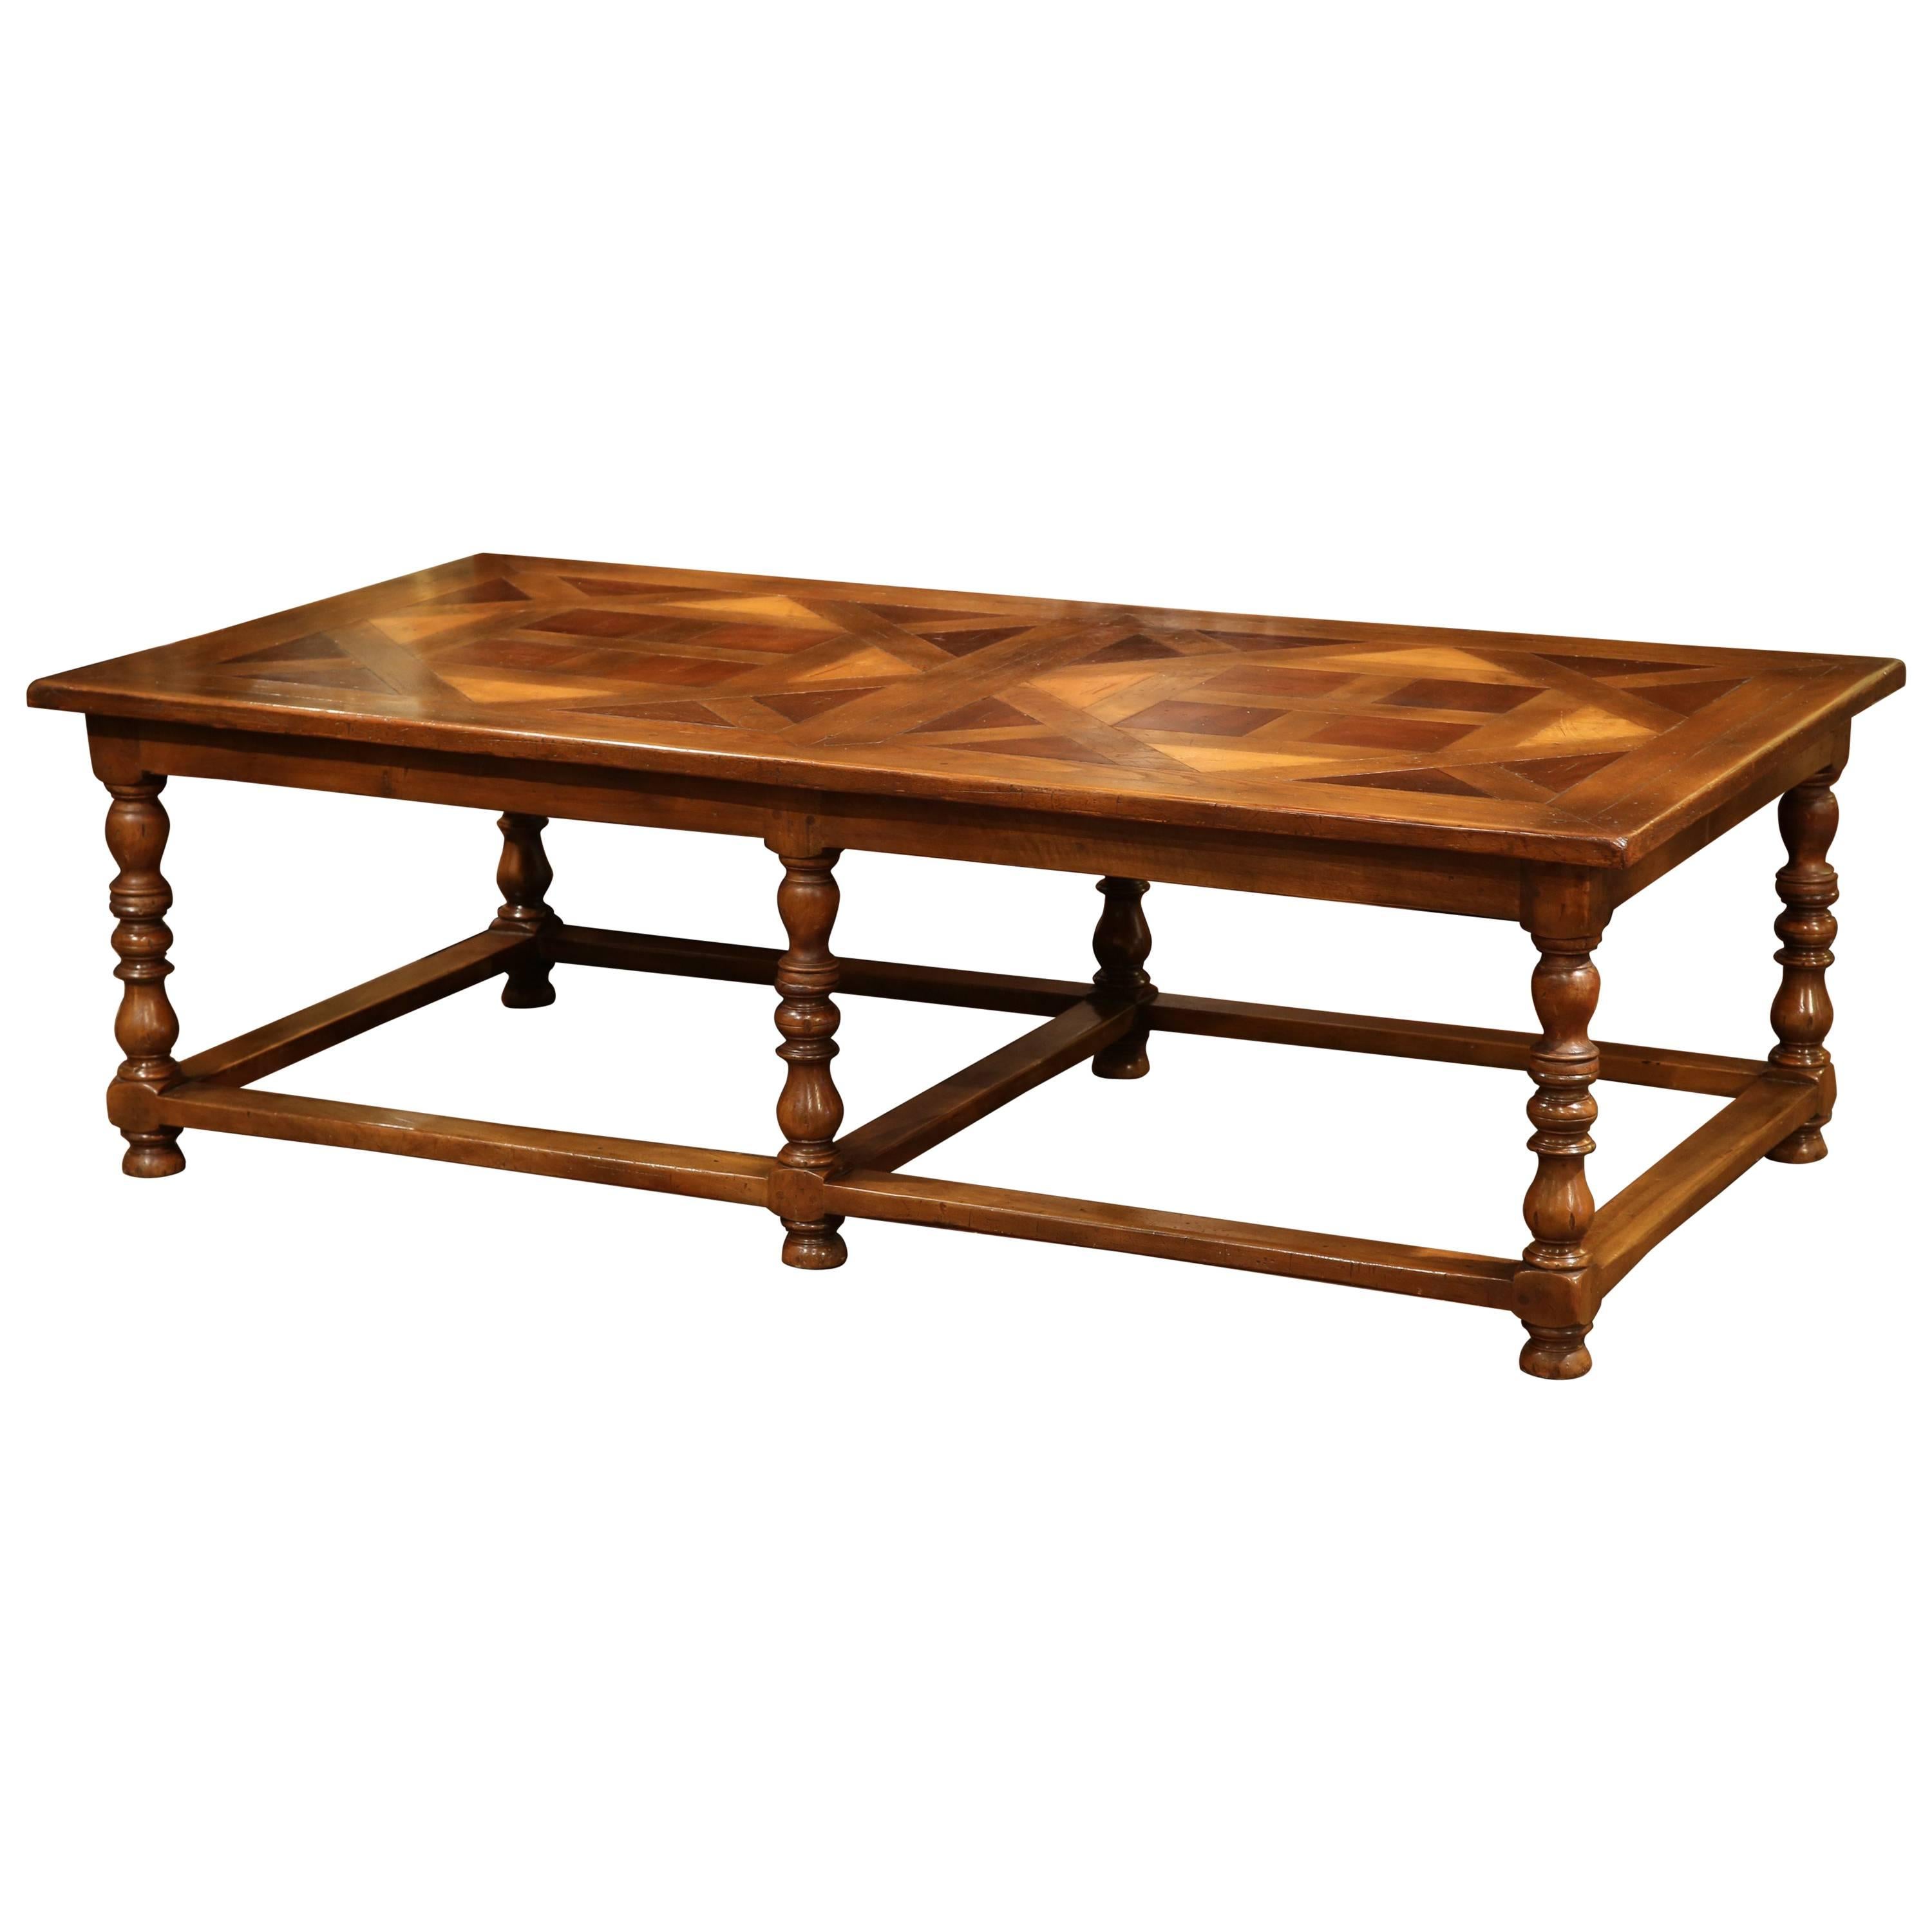 Large French, Six-Legged and Stretcher Walnut Coffee Table with Parquet Top